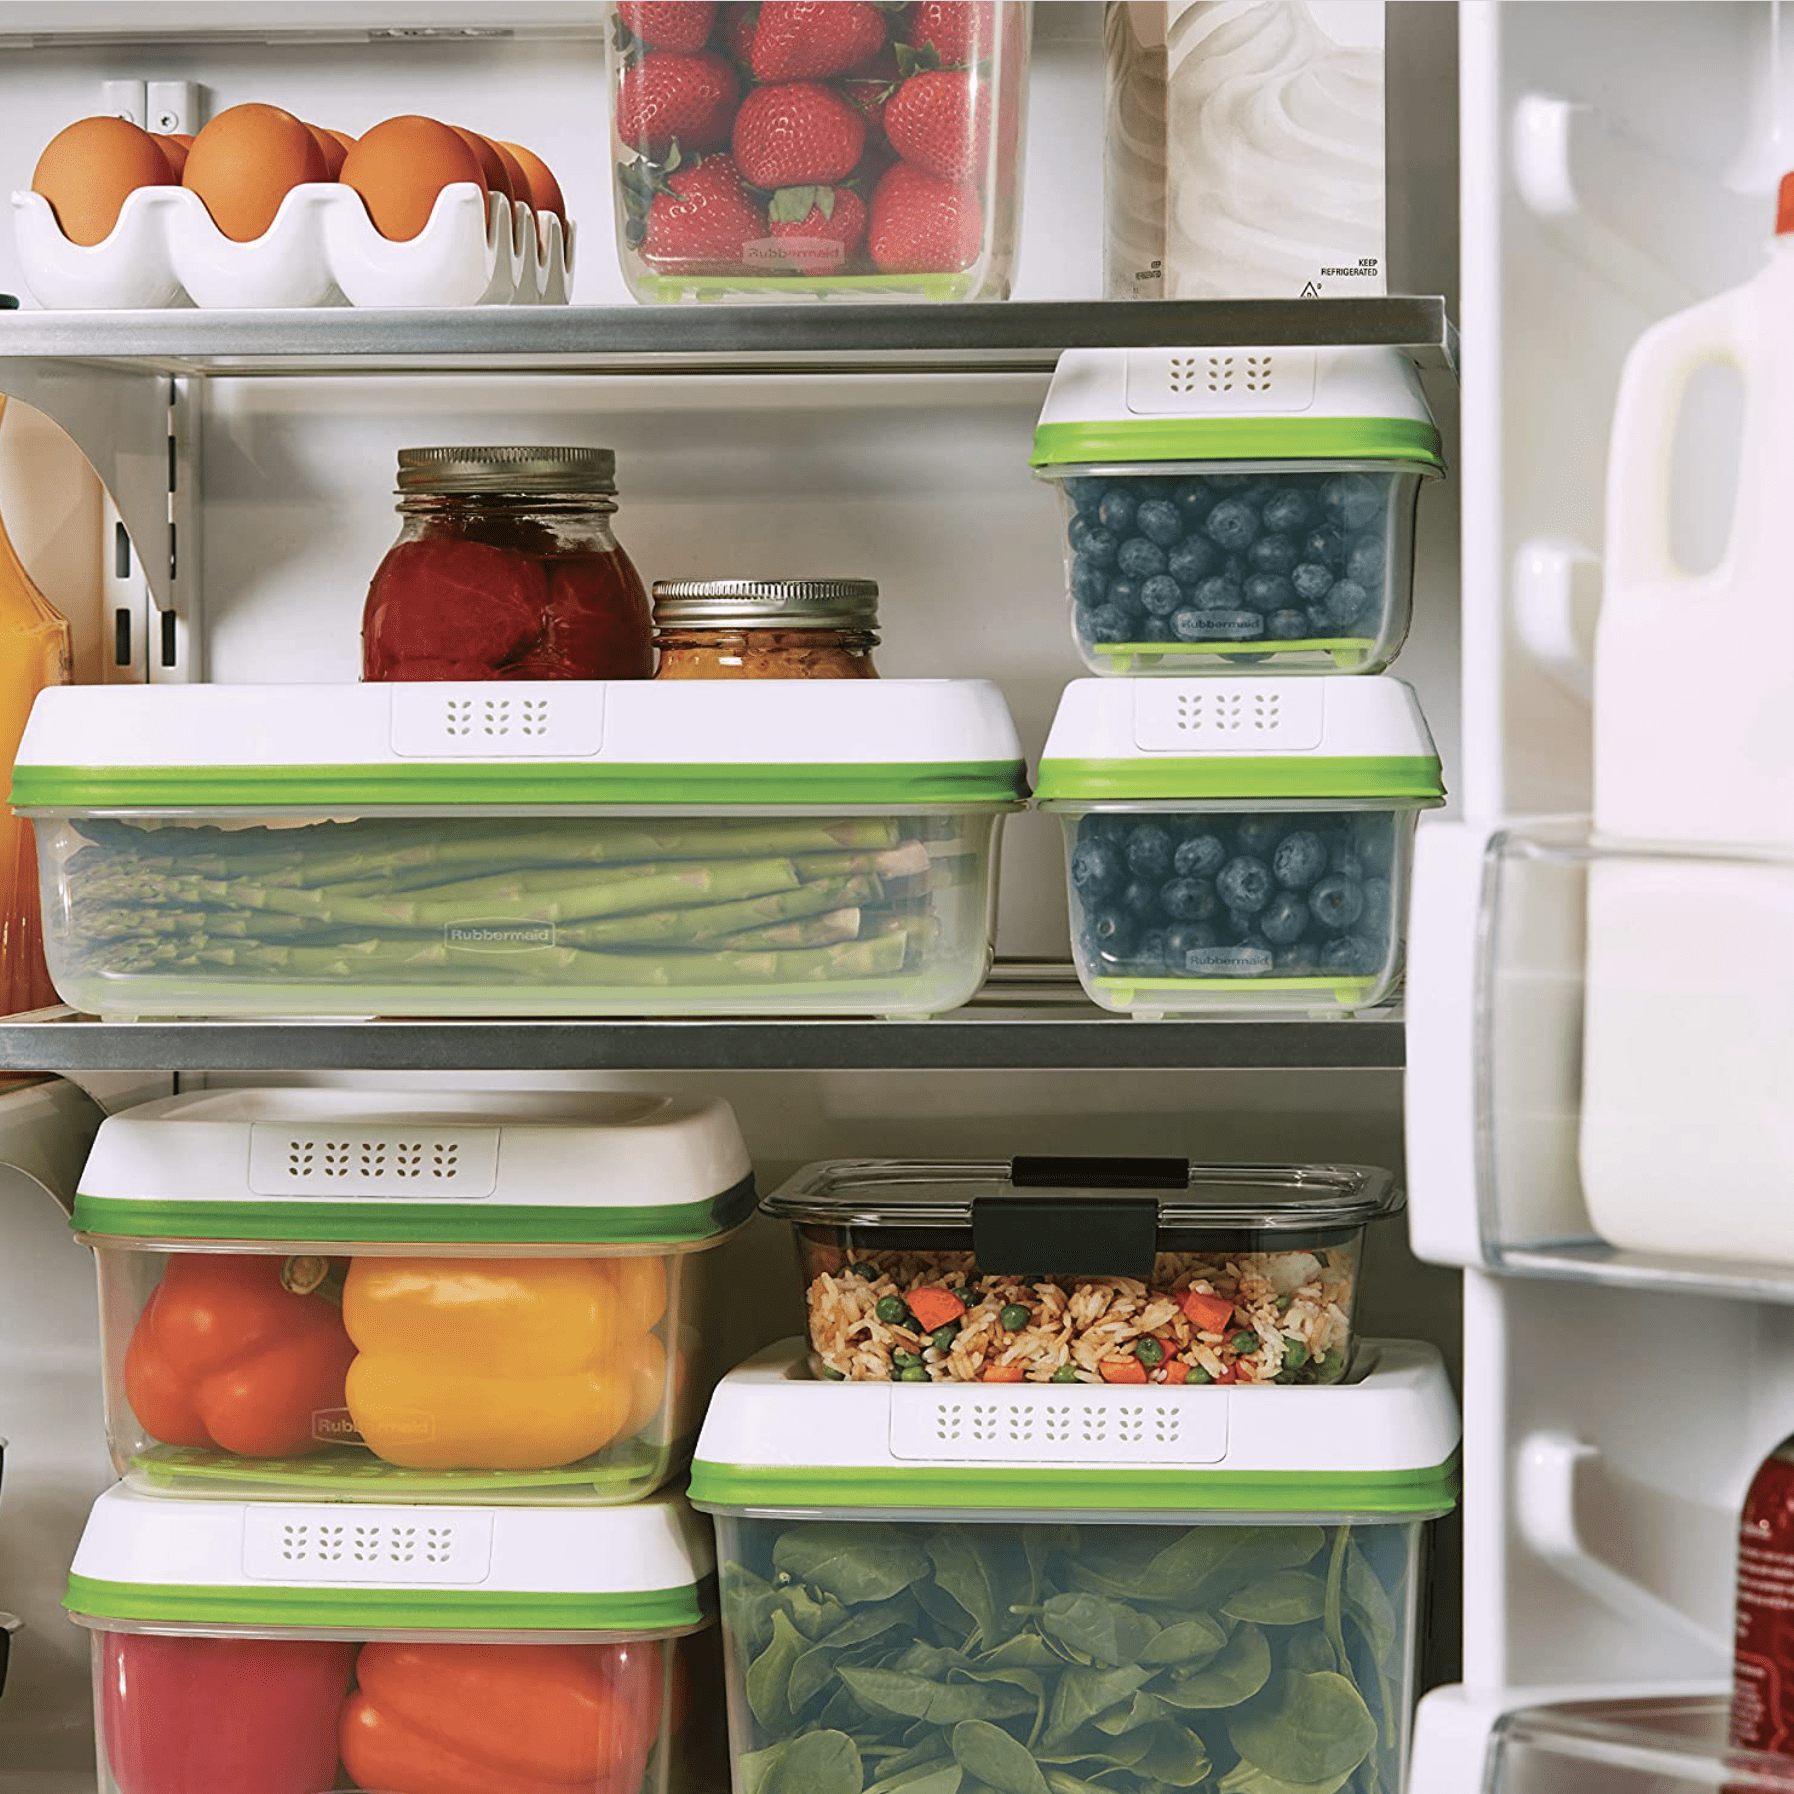 https://www.tasteofhome.com/wp-content/uploads/2022/06/rubbermaid-containers-ecomm-amazon-e1675367073601.png?fit=700%2C700